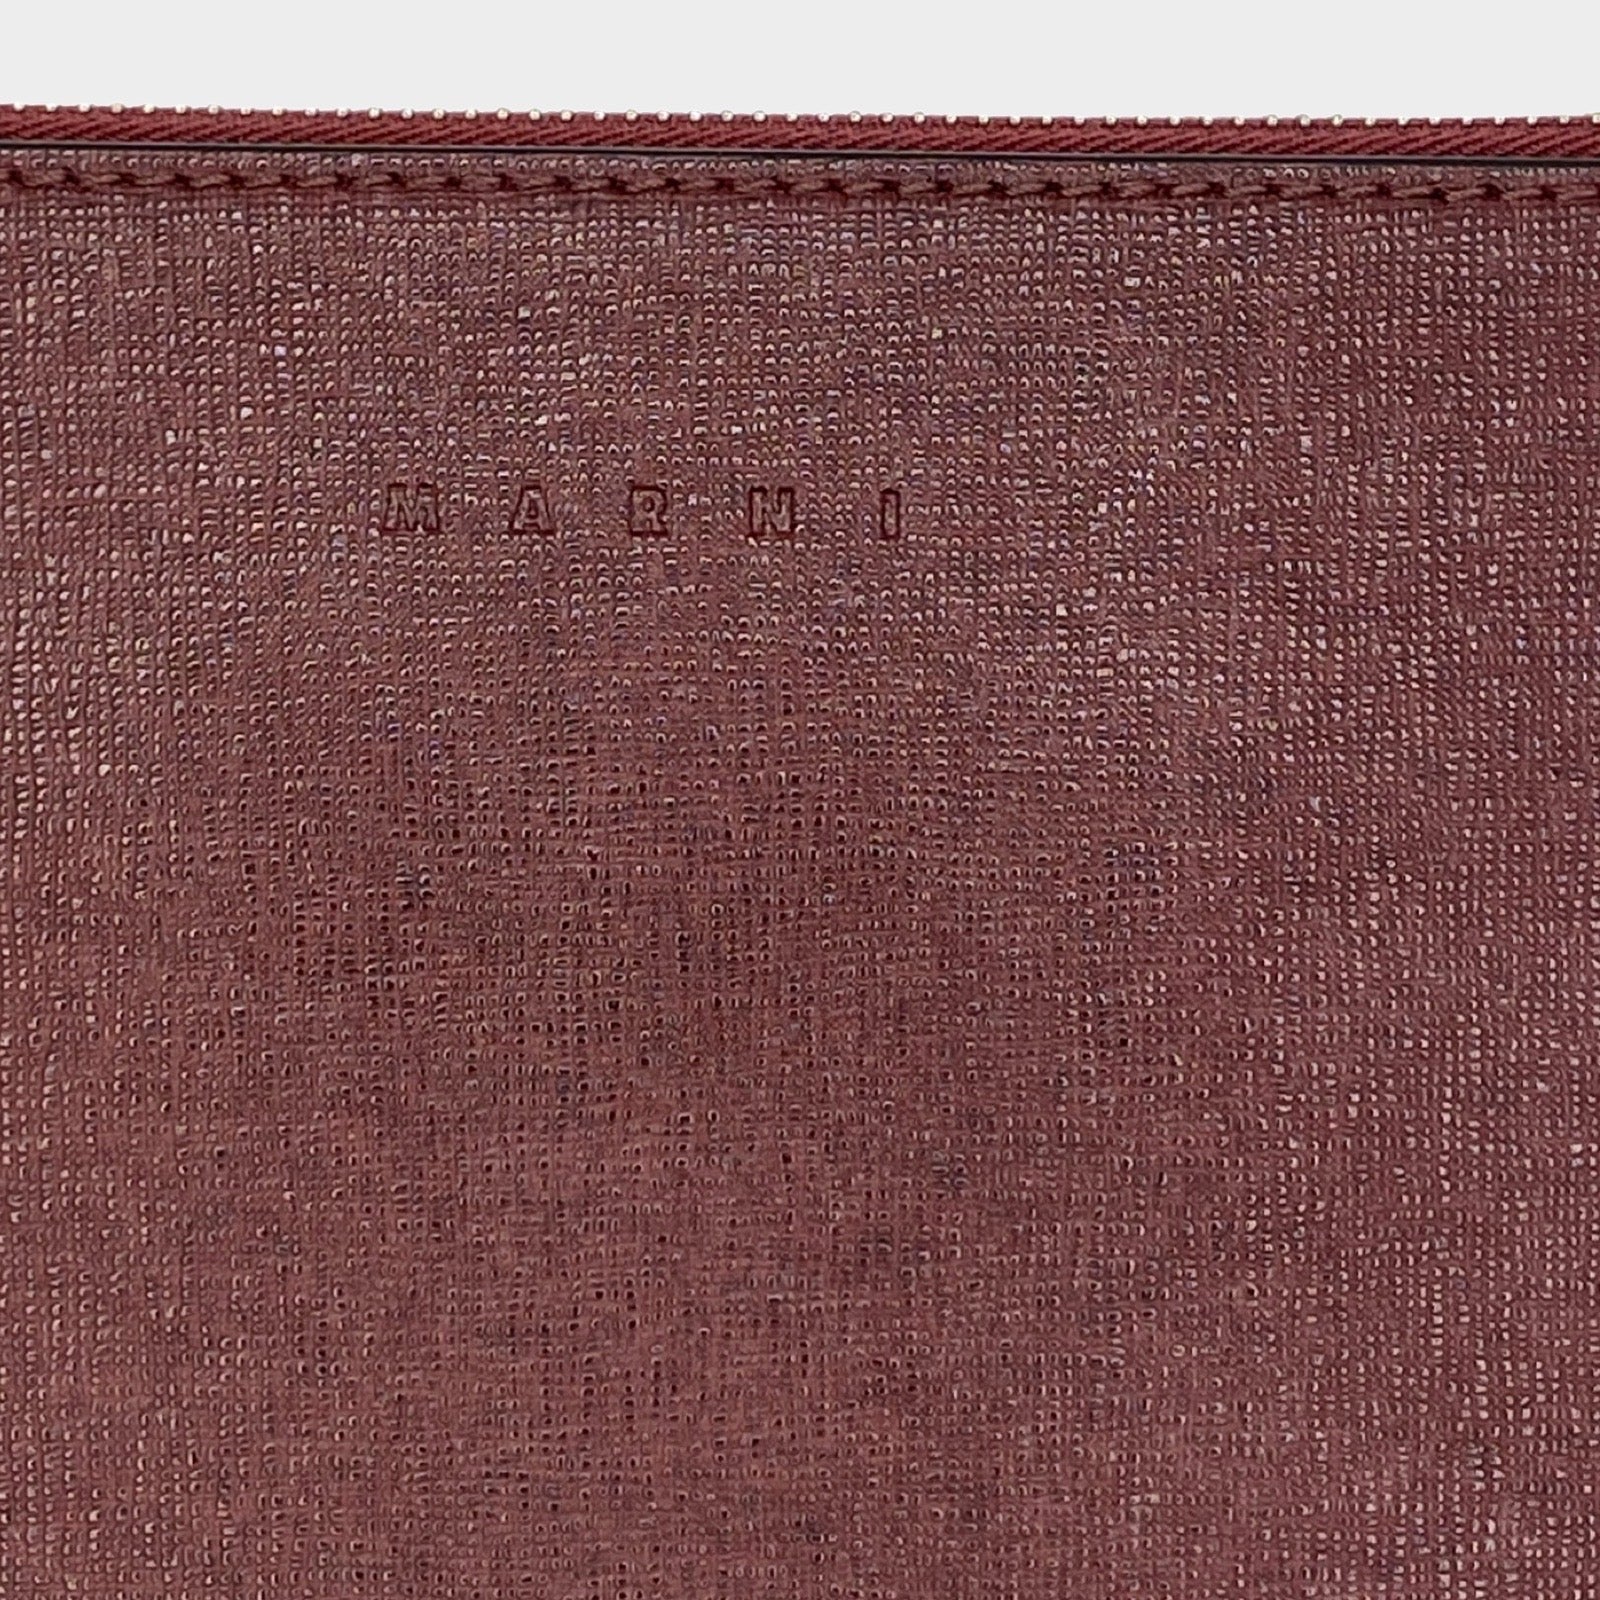 Marni men's burgundy saffiano leather pouch – Loop Generation